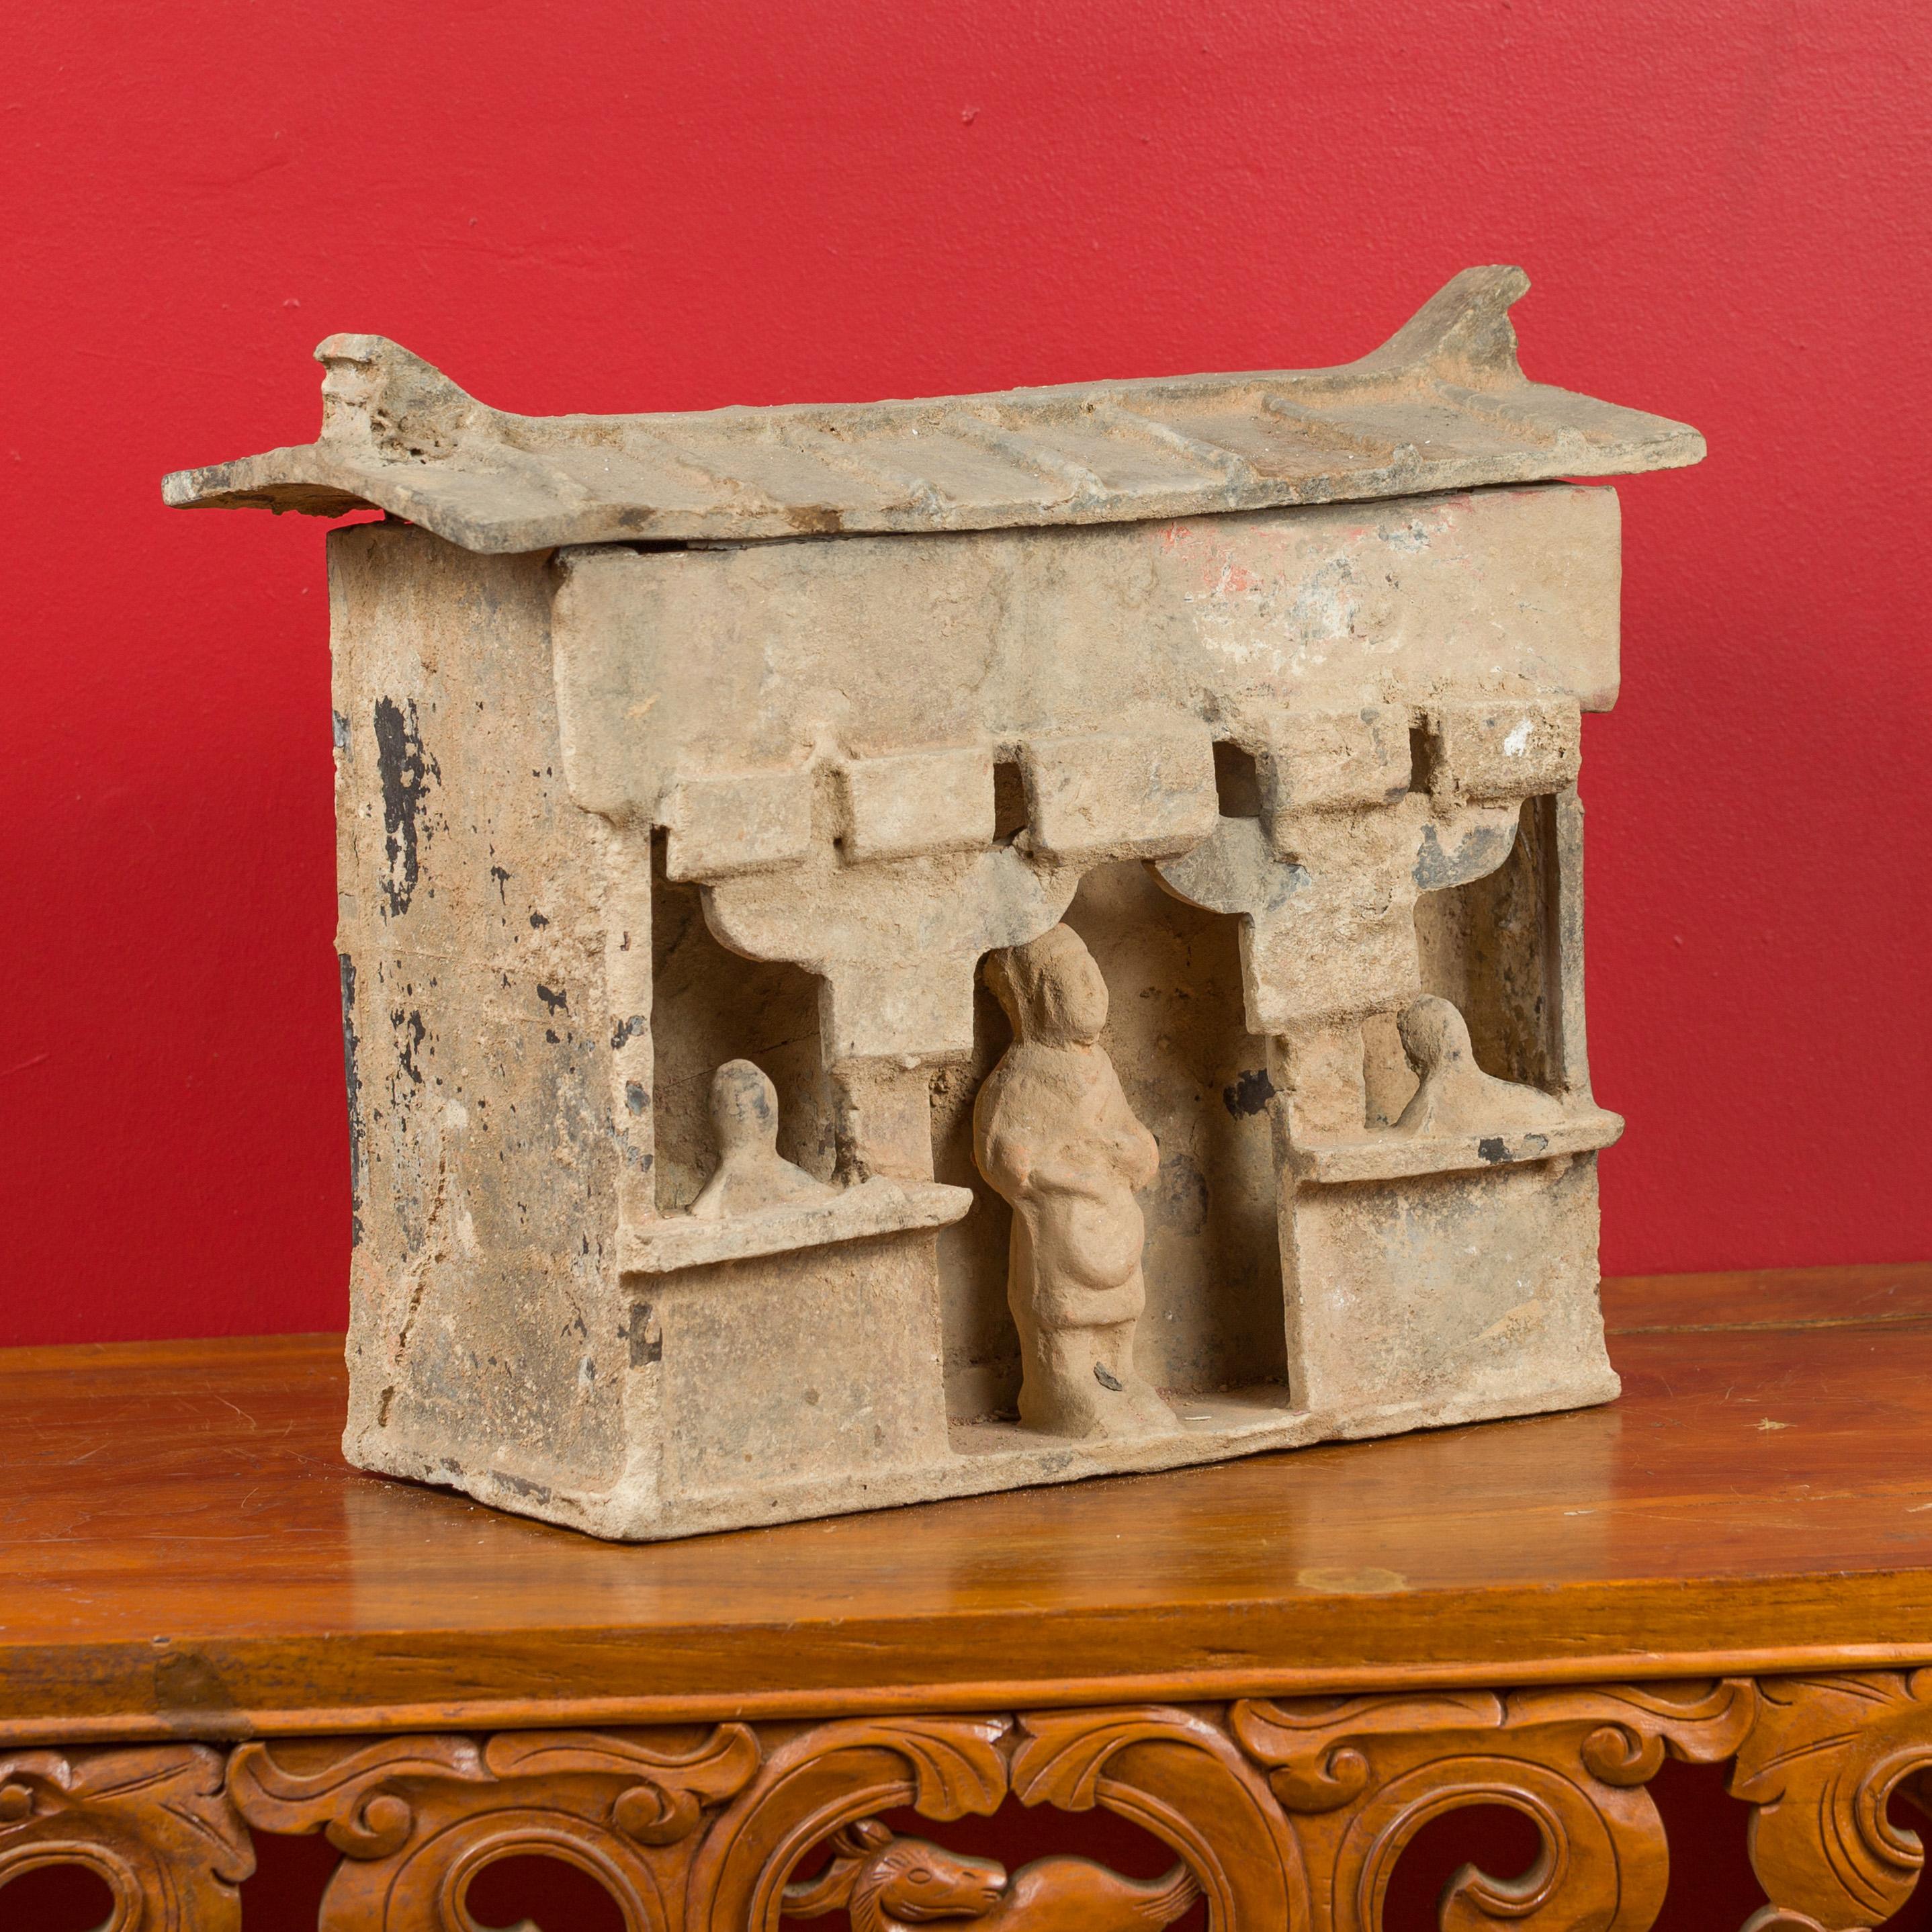 18th Century and Earlier Chinese Han Dynasty Mingqi House Model with Its Inhabitants, circa 202 BC-200 AD